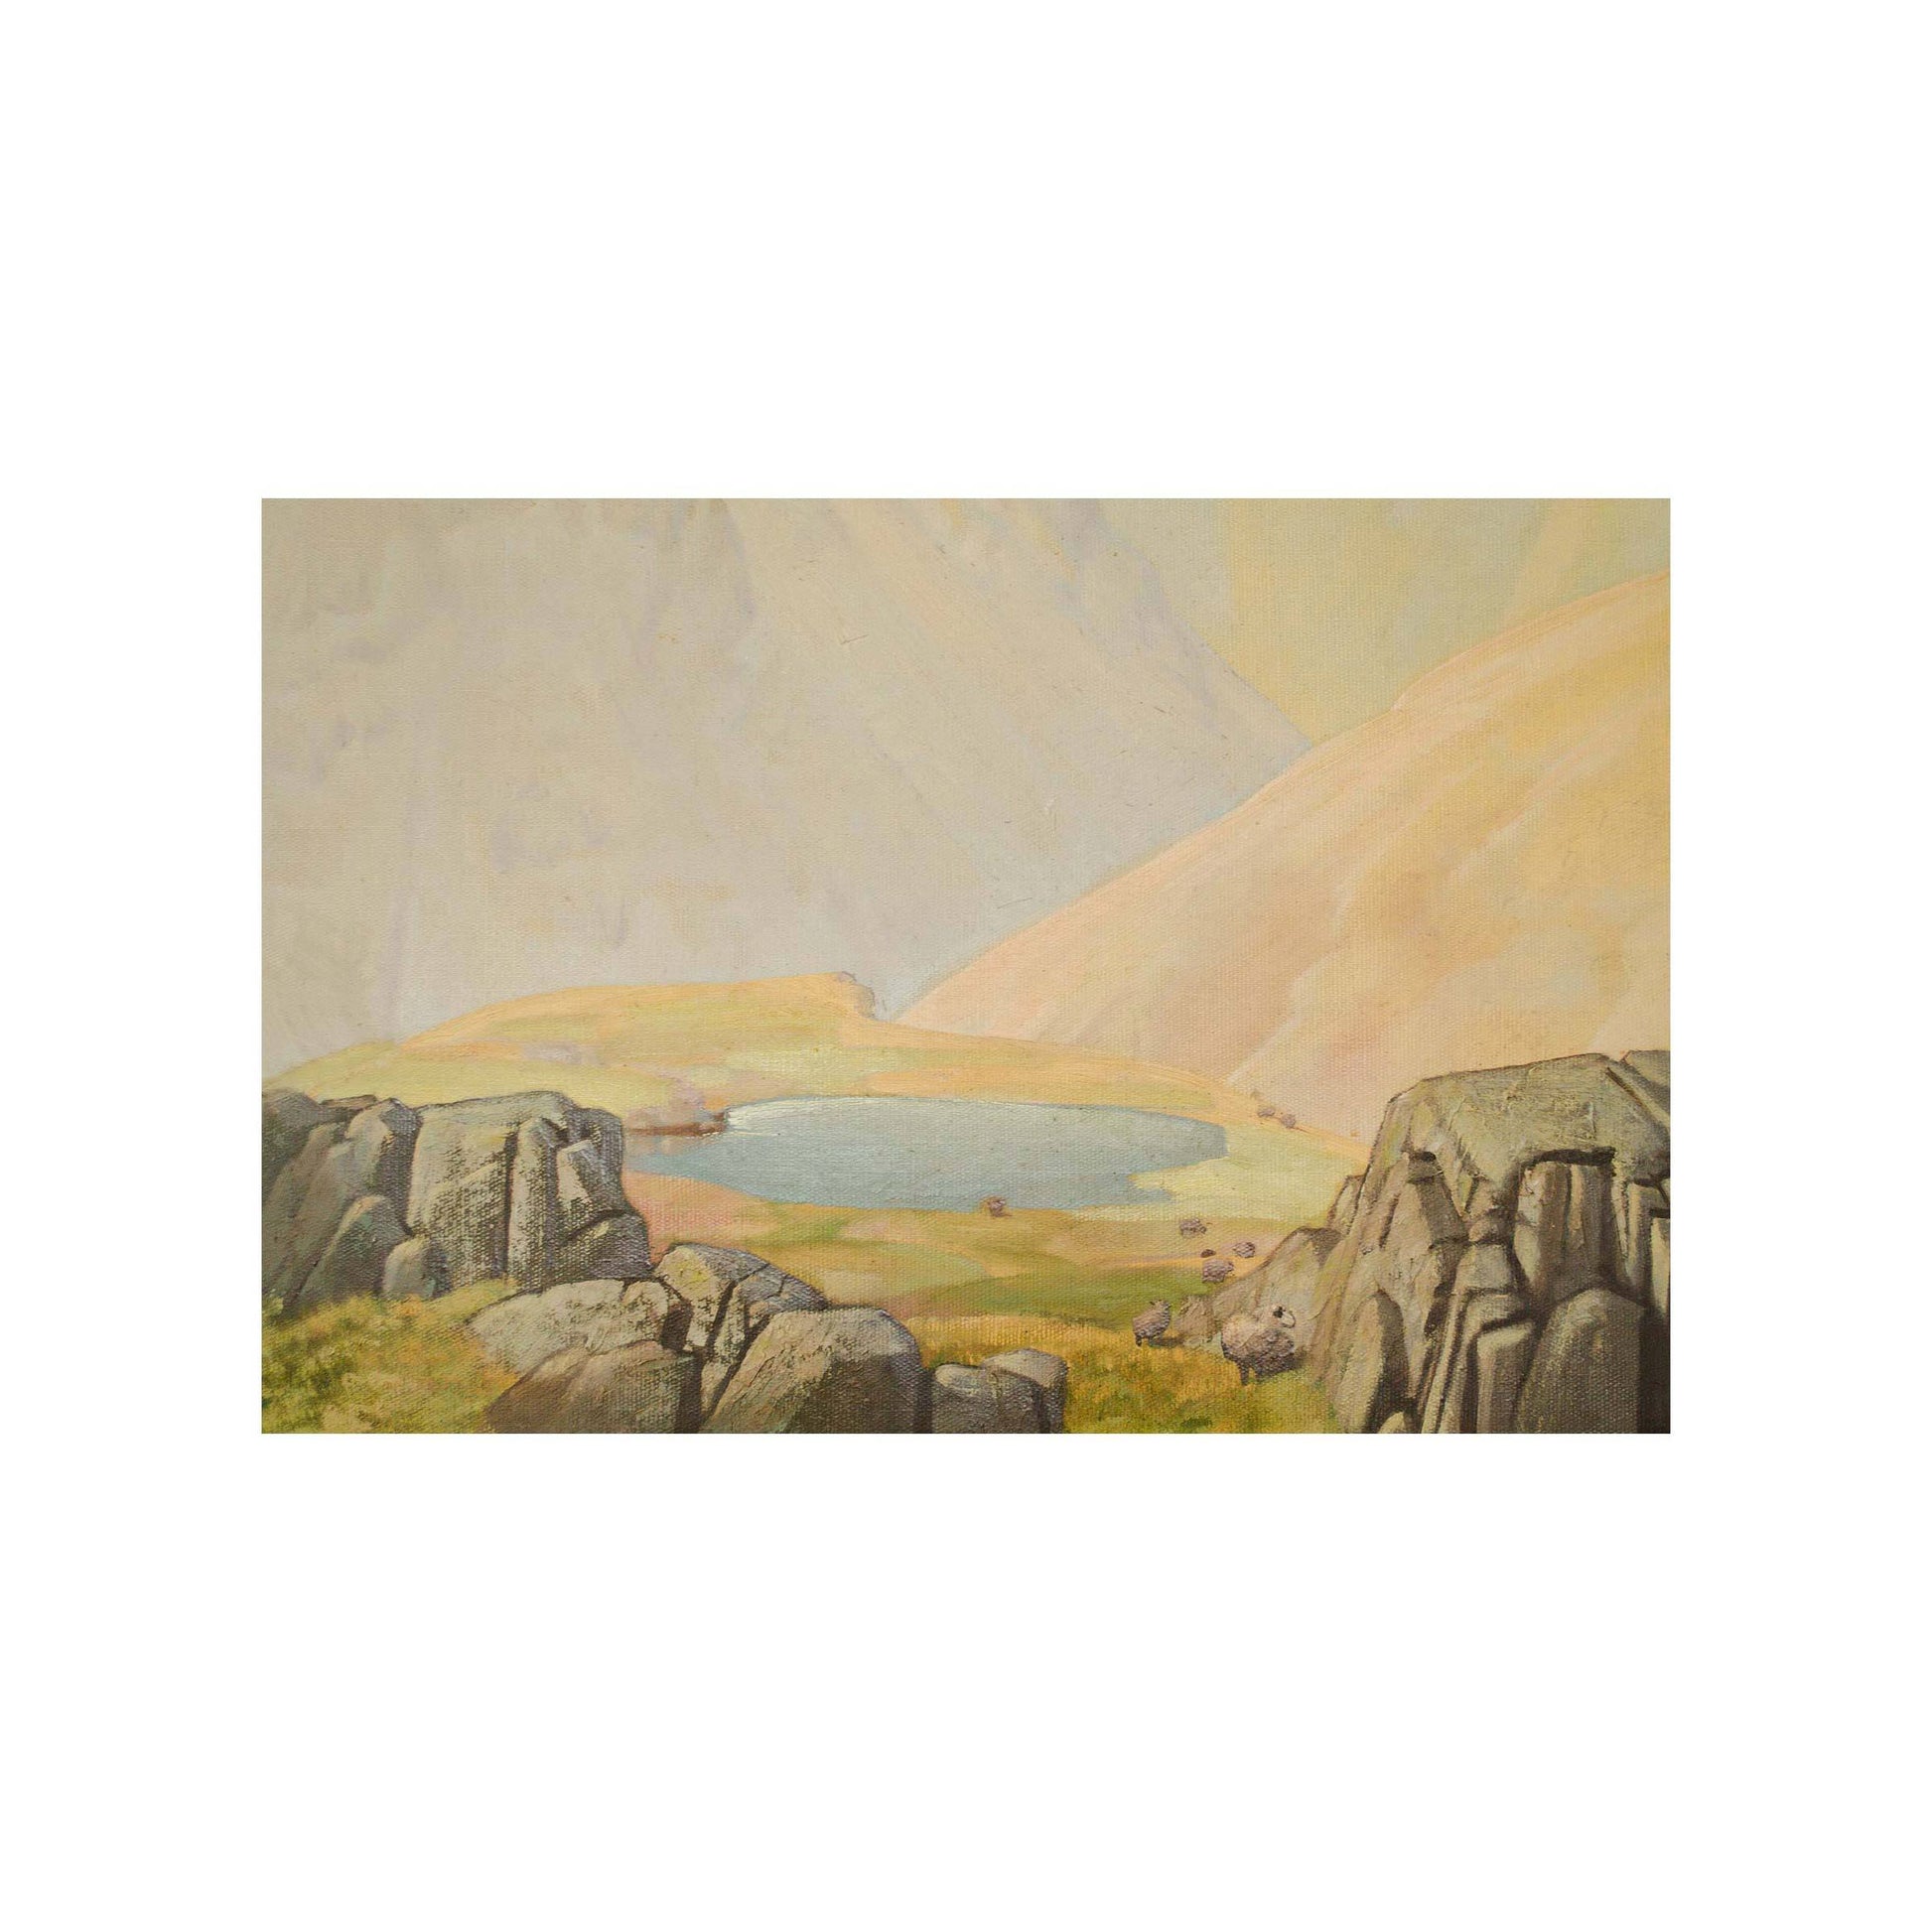 Delmar Banner Delmar Banner Large Oil Painting of Great Gable Lake District 1933 1933